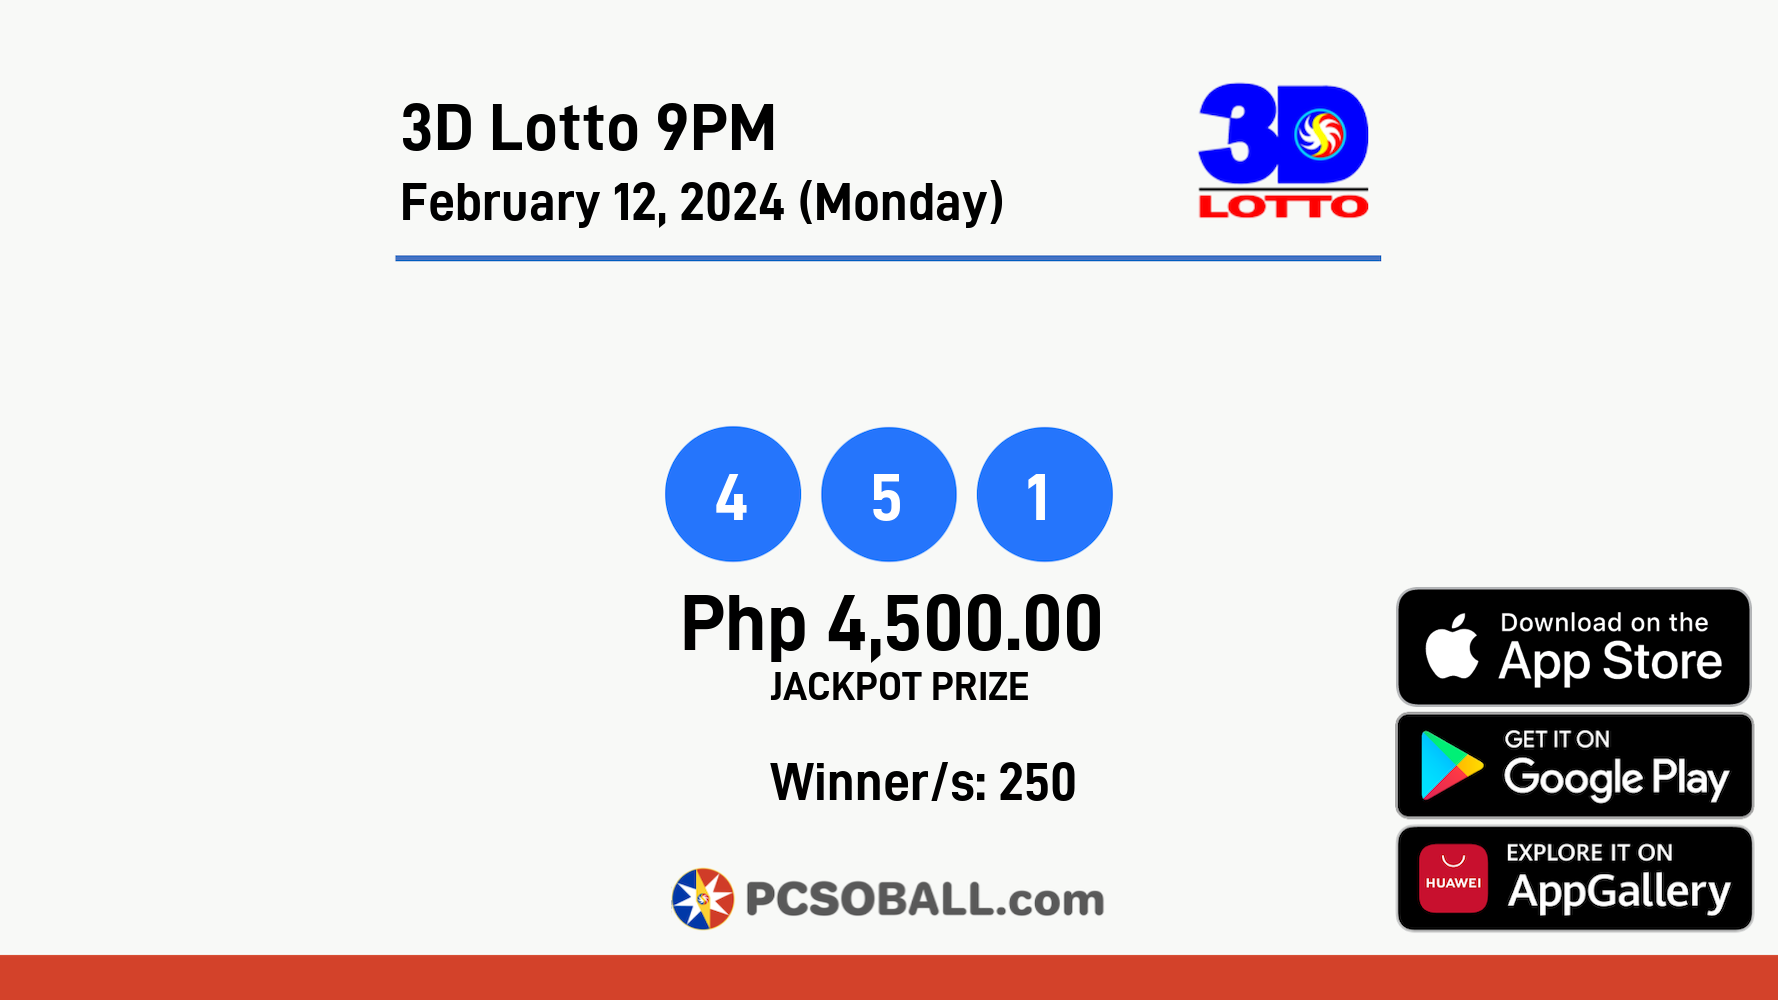 3D Lotto 9PM February 12, 2024 (Monday) Result